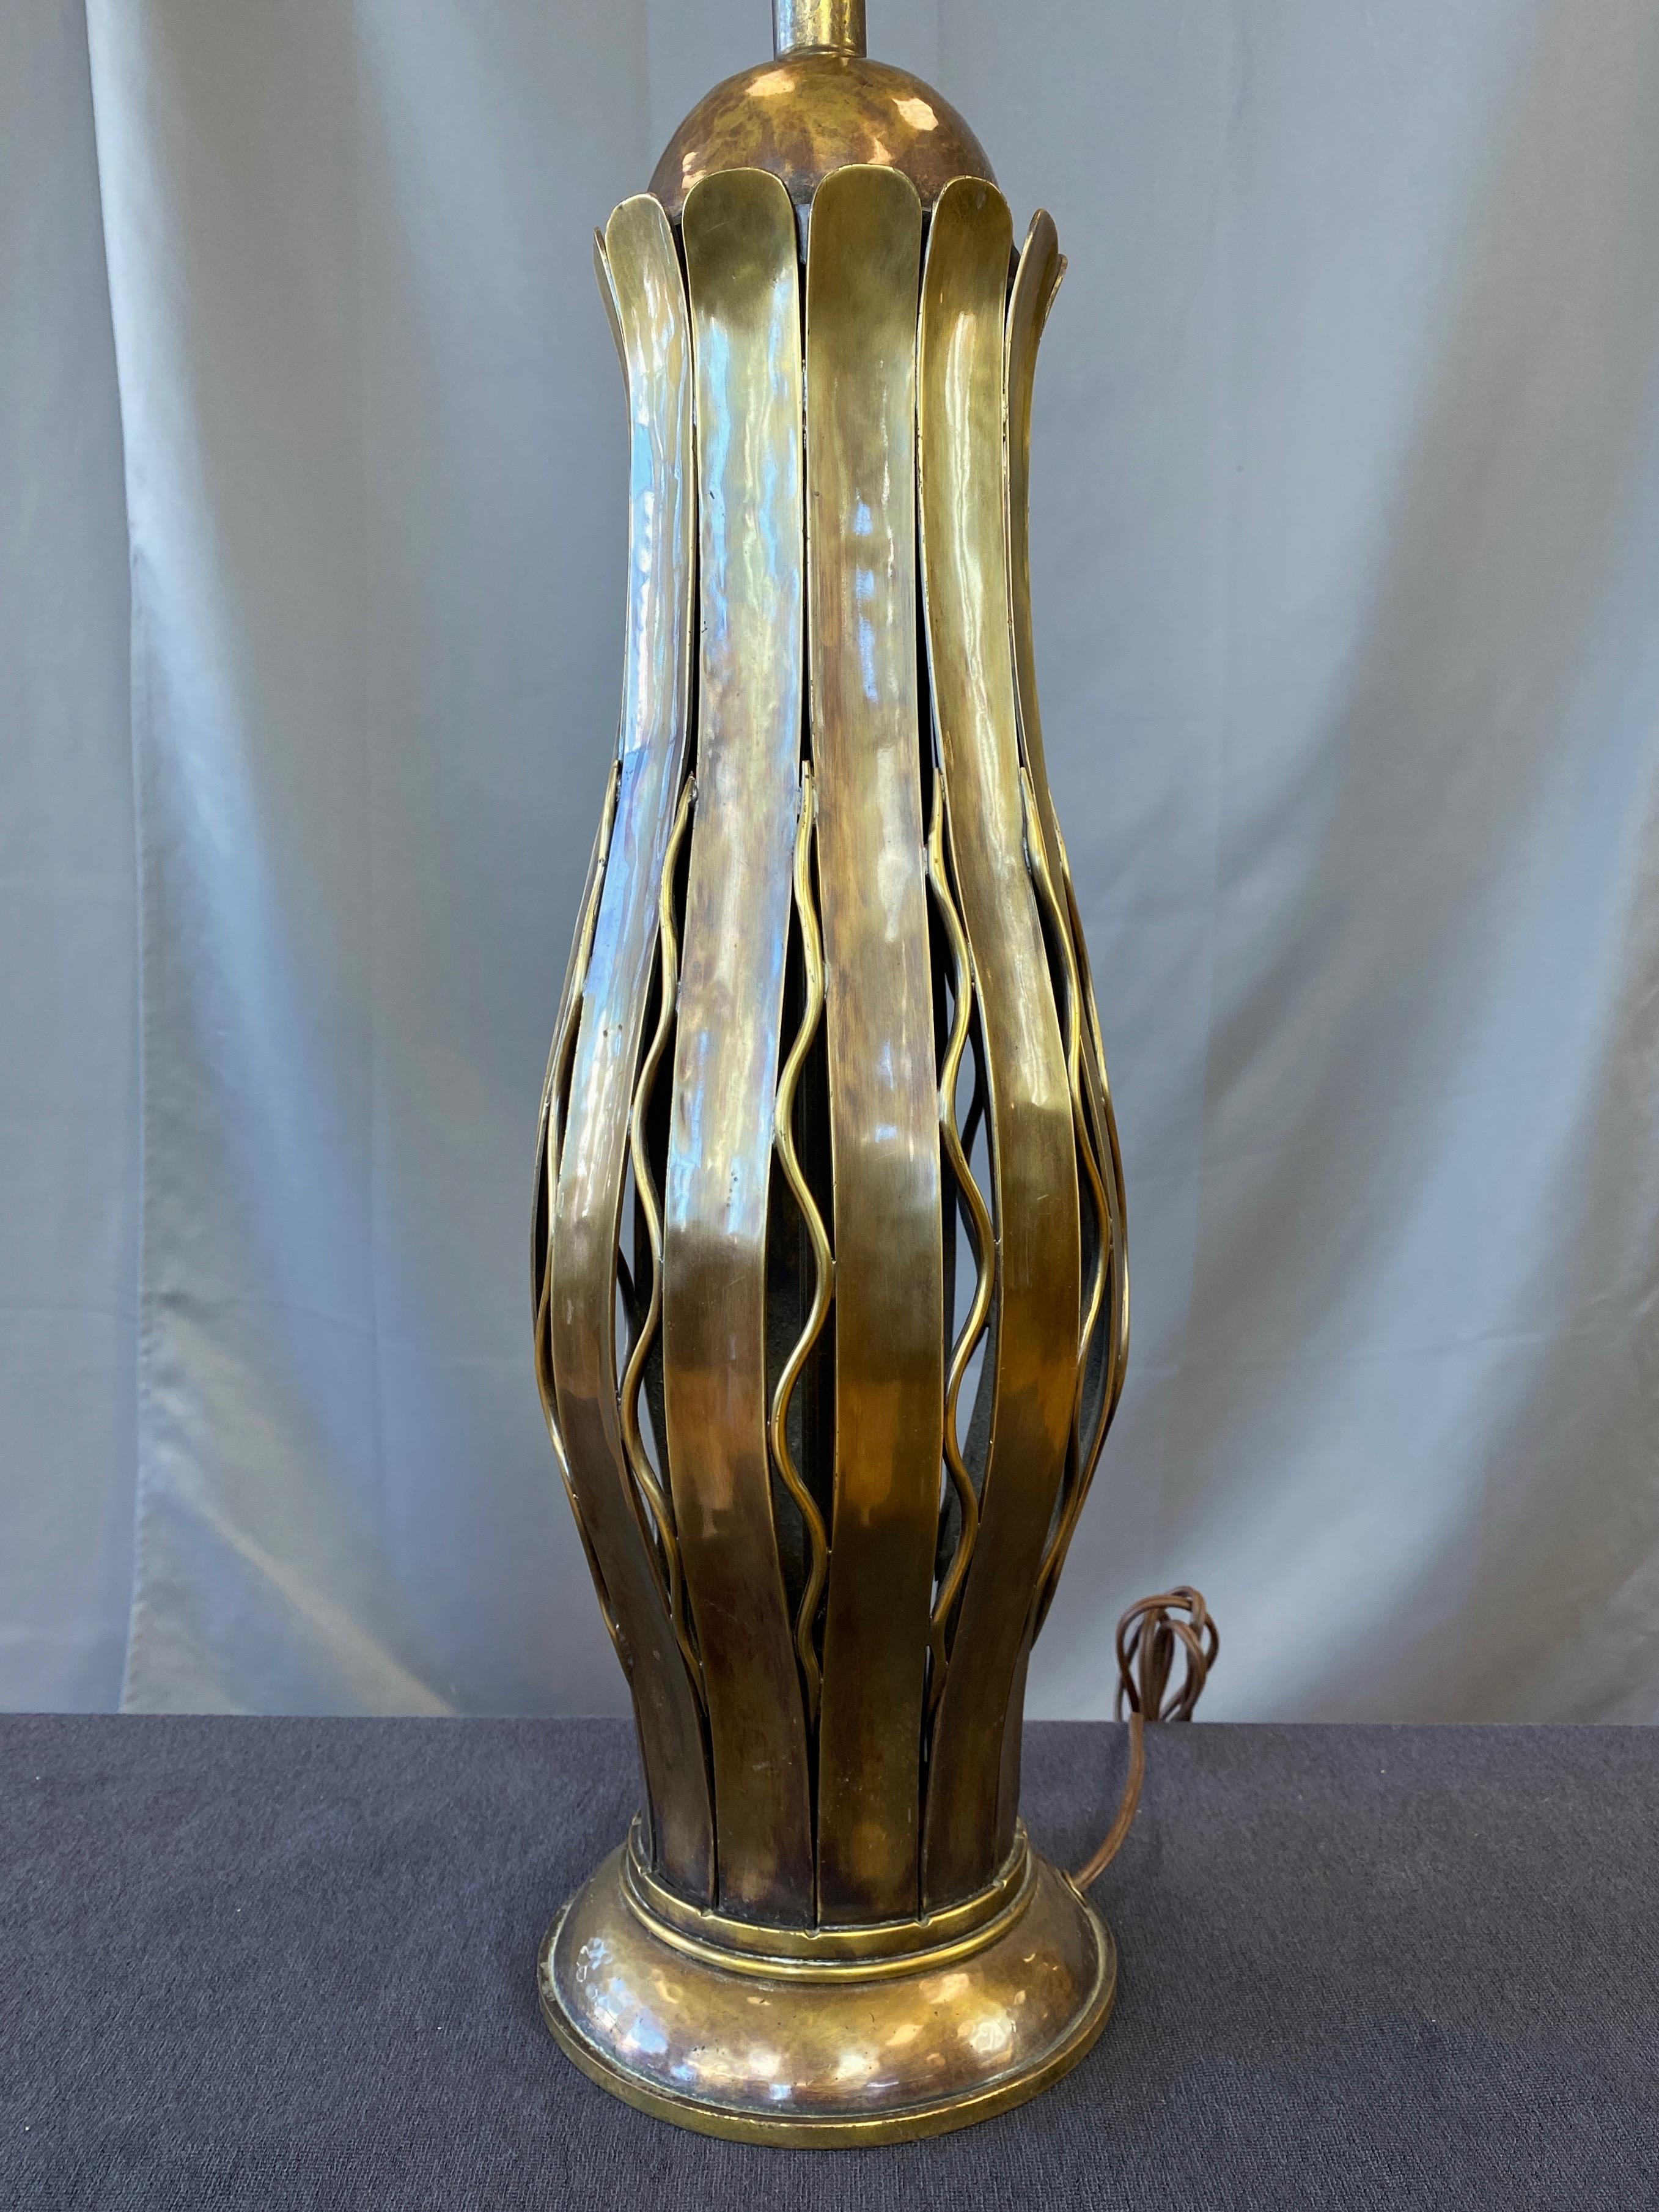 Hans Grag for Gump’s Hammered Copper and Brass Table Lamp, 1950s For Sale 5